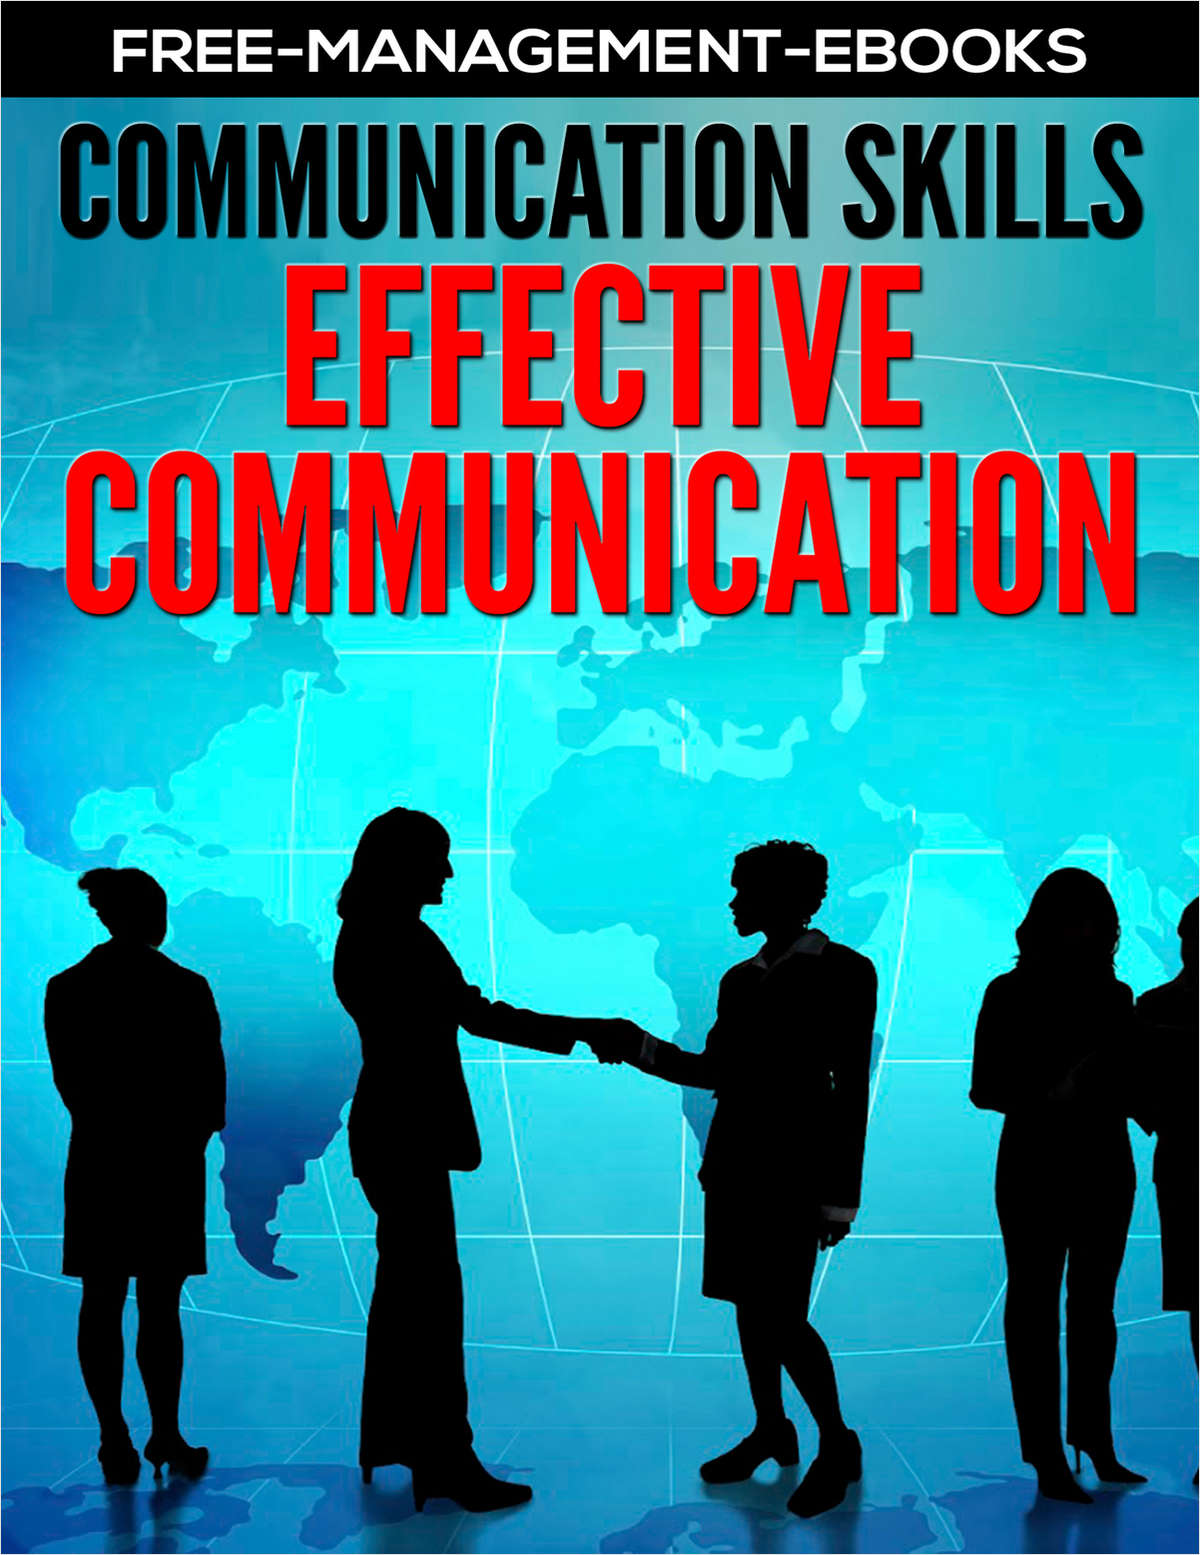 Effective Communications - Developing Your Communication Skills